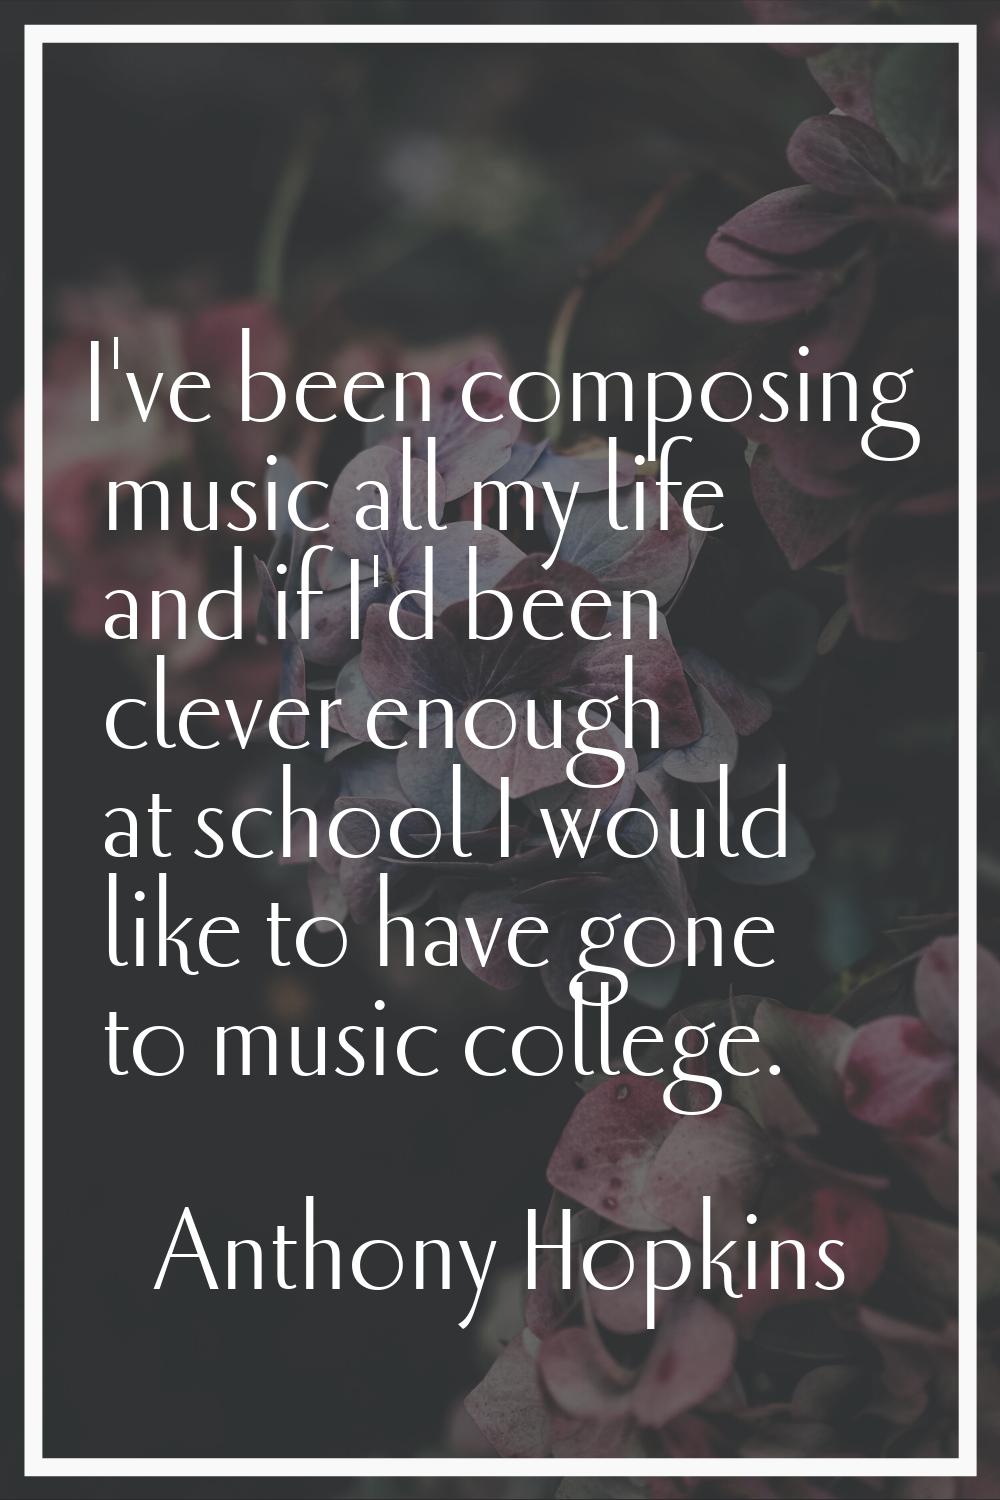 I've been composing music all my life and if I'd been clever enough at school I would like to have 